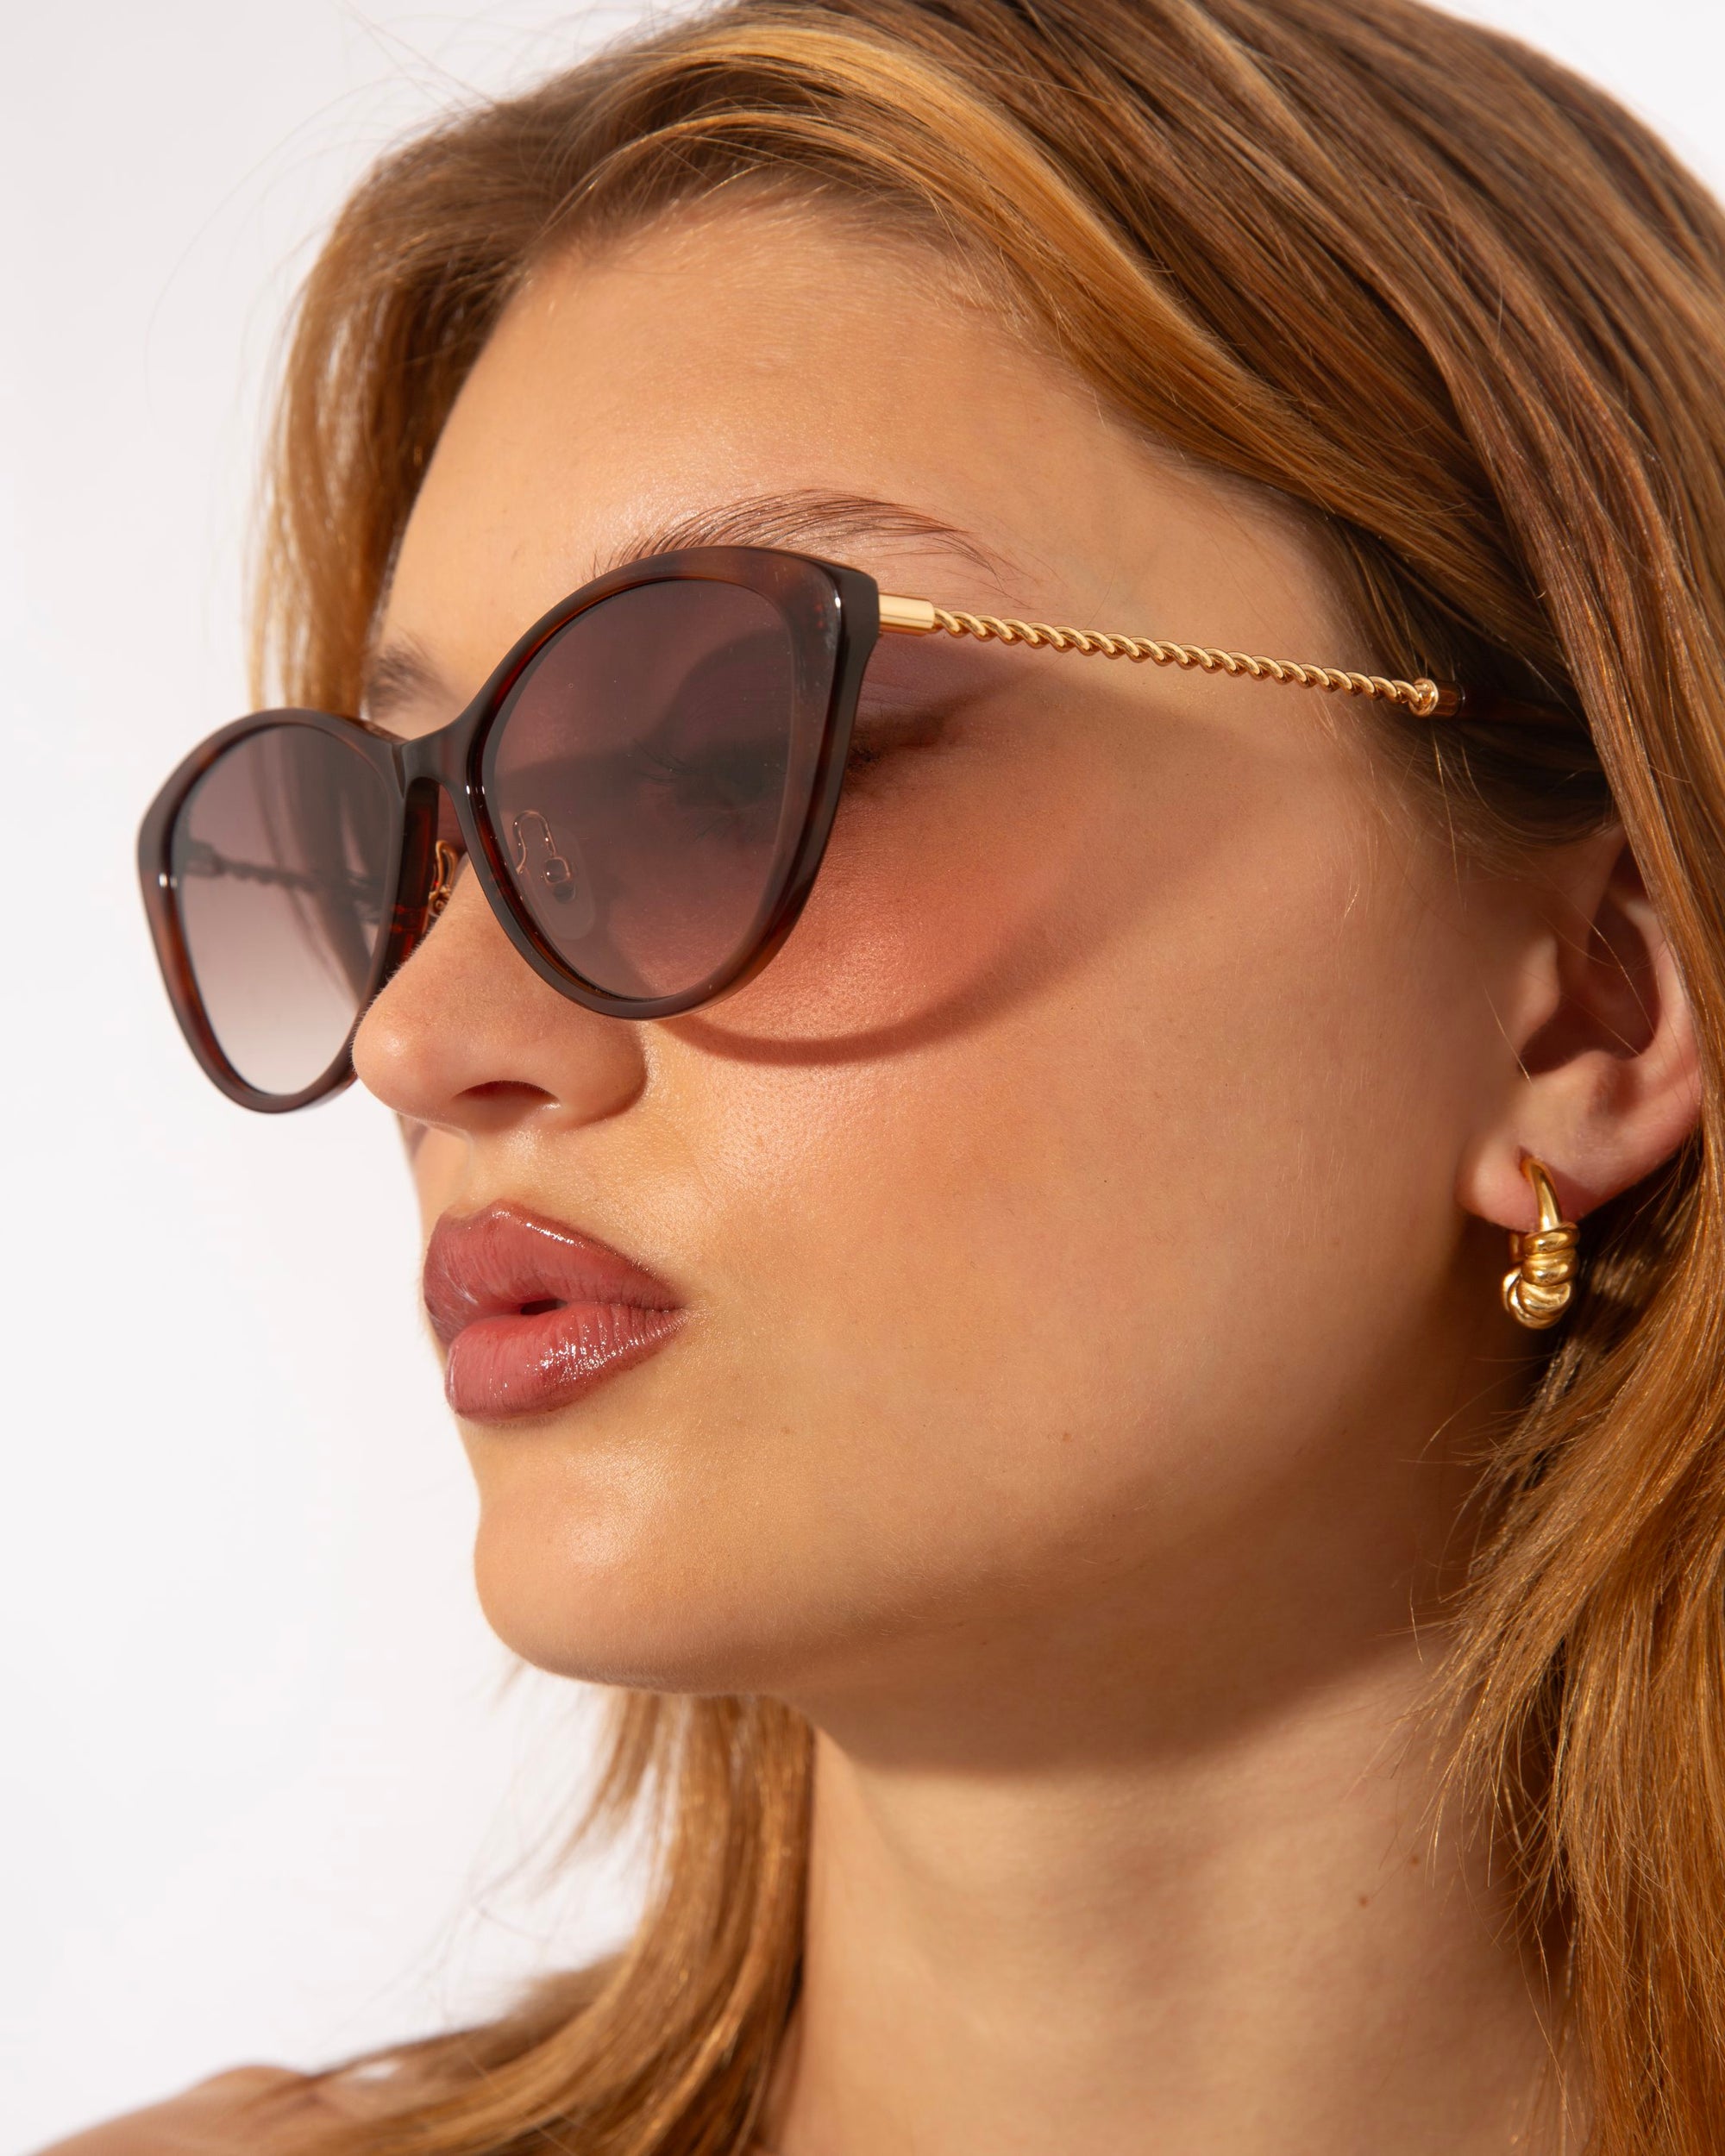 A close-up of a person wearing large, dark, cat-eye For Art&#39;s Sake® Perla II sunglasses with a gold frame and jade-stone nose pads. They have light brown hair and are also wearing a small 18-karat gold hoop earring in one ear. The background is plain white.